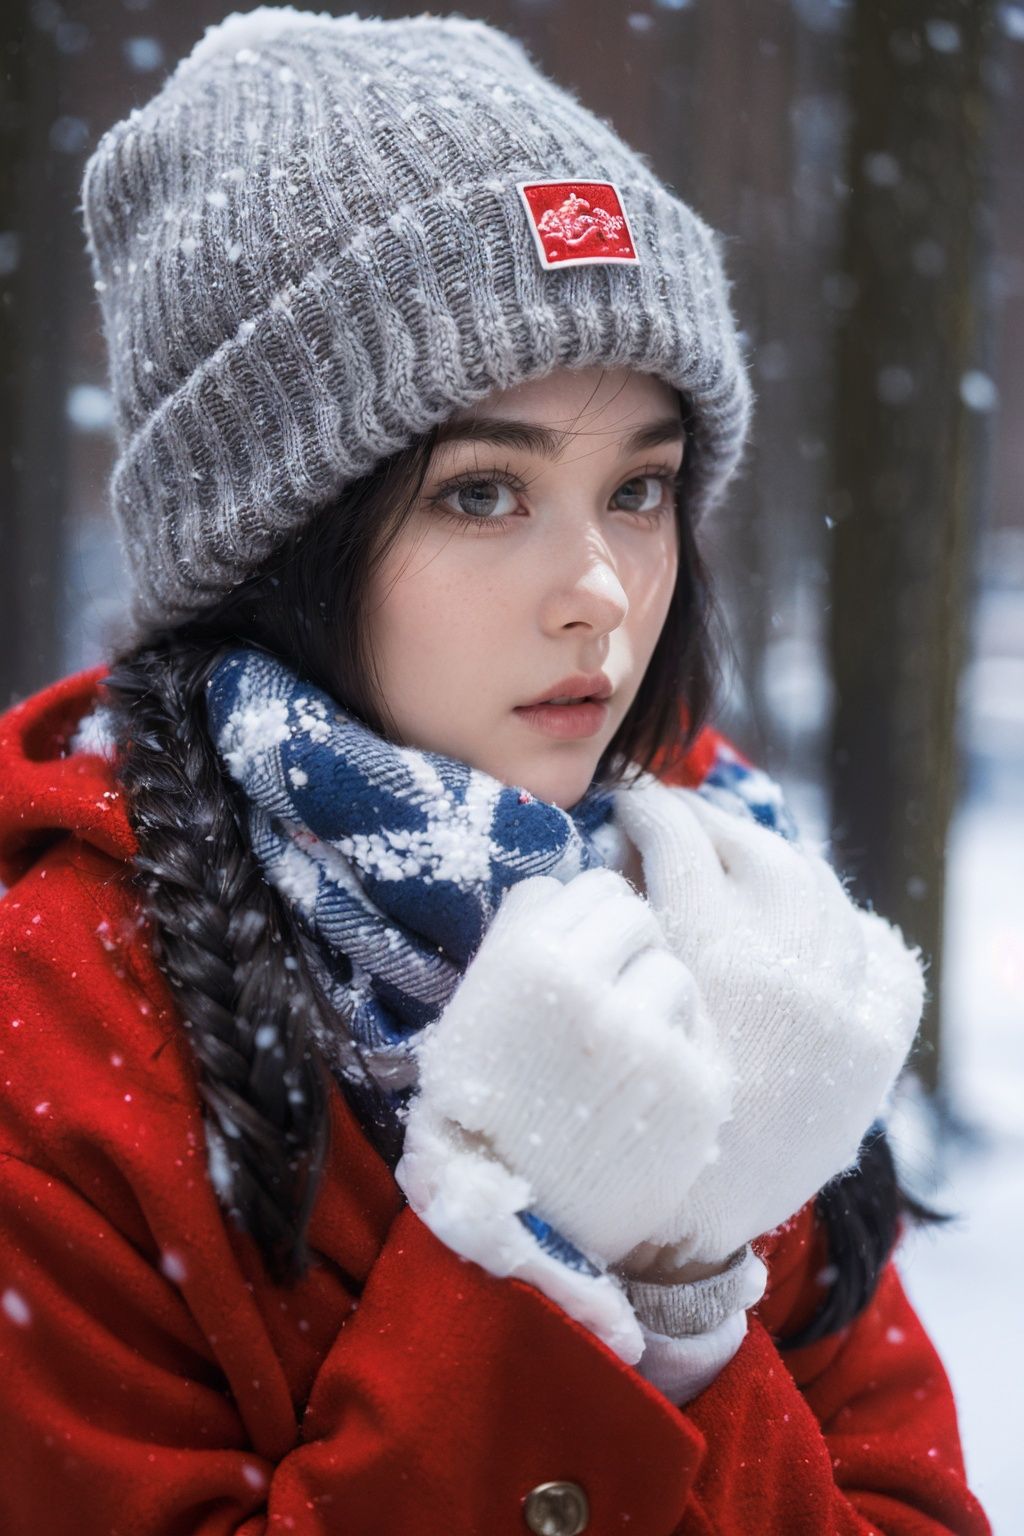  Best Quality, masterpiece, Ultra High Resolution, (photo: 1.4) , outdoors, snowing, a girl wearing a plush hat, red clothes, red coat, coat, winter, realism, HD 16K